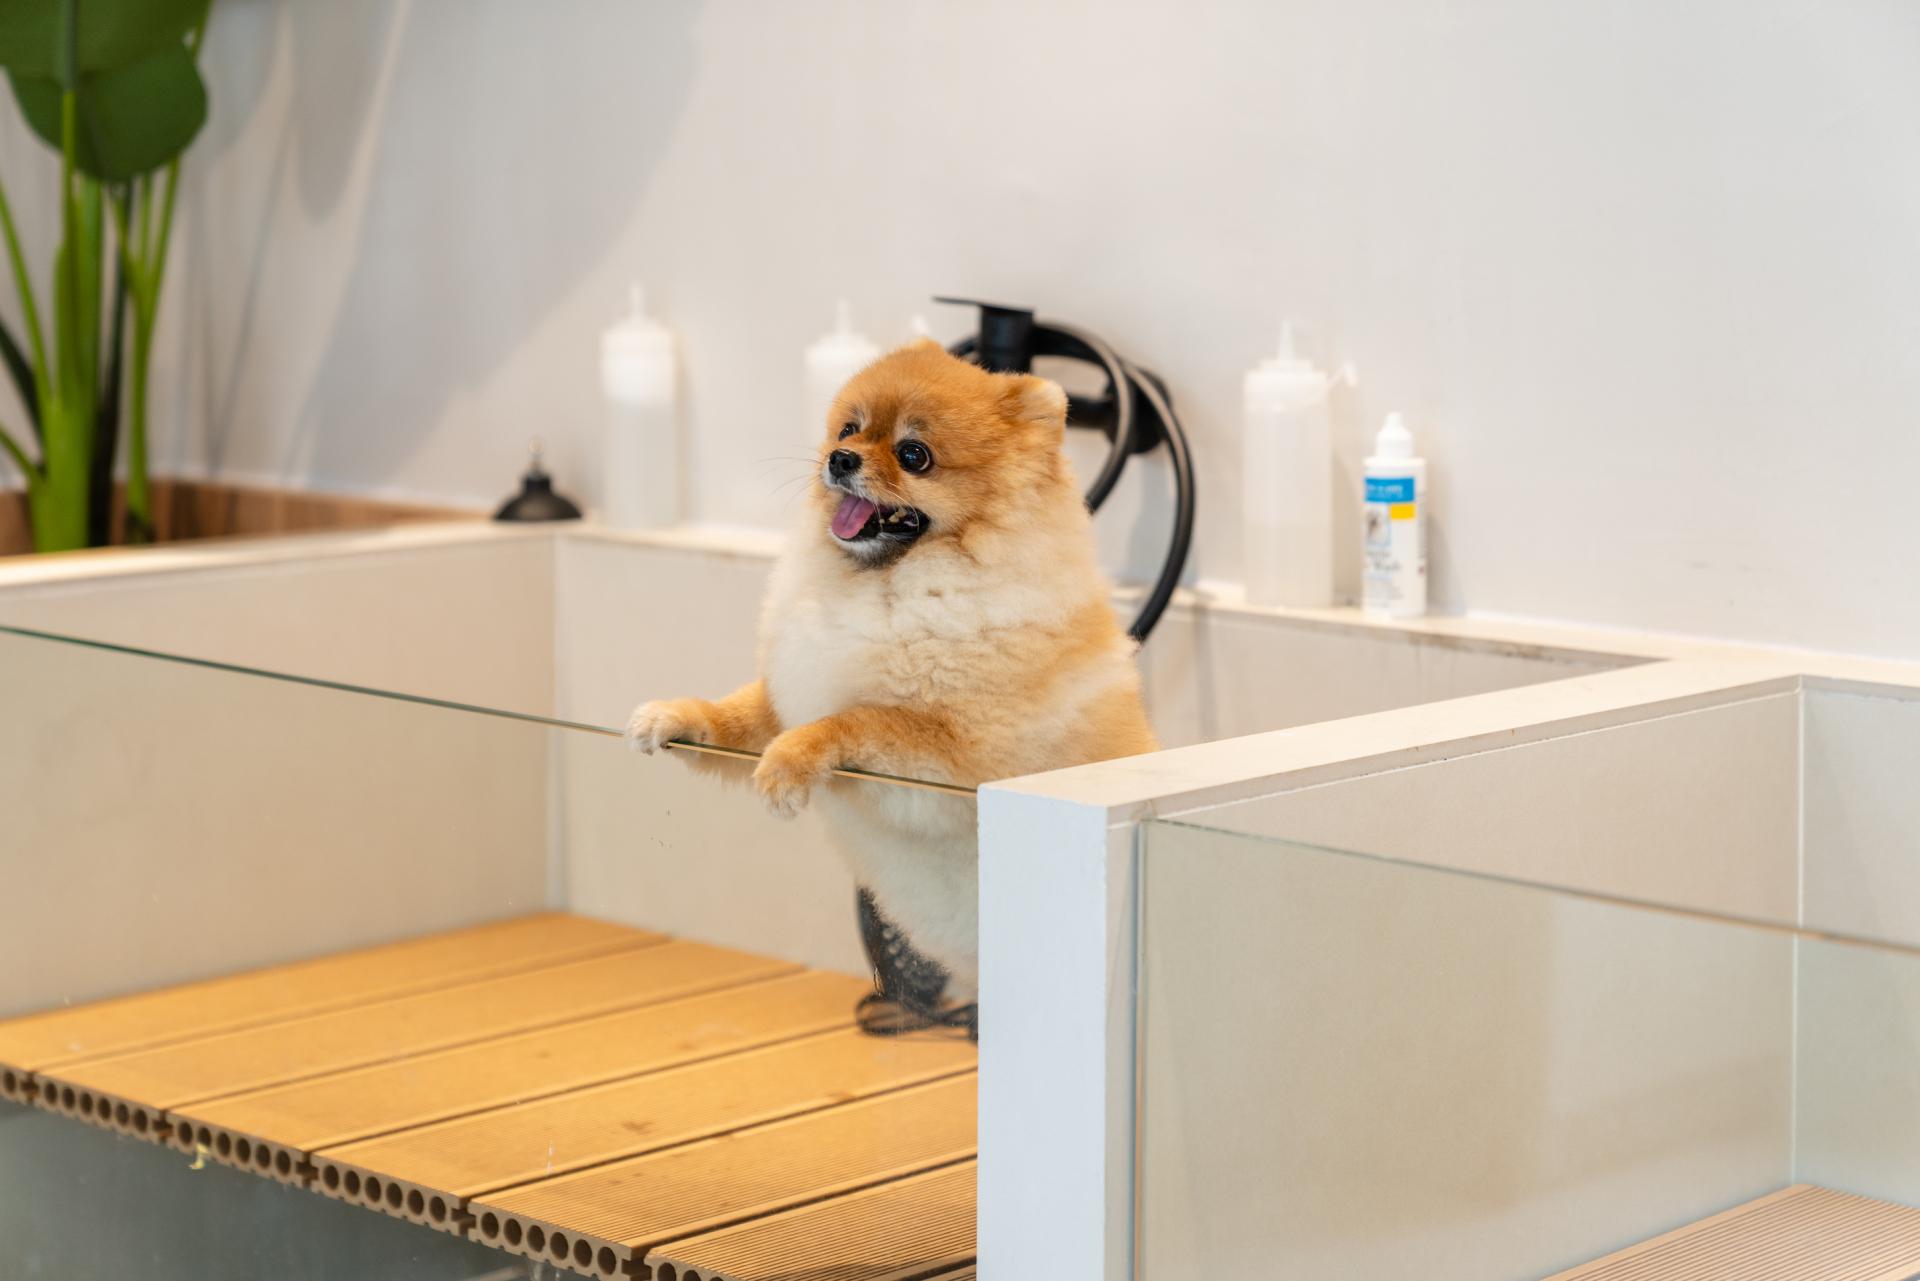 Cosy 900 sq. ft. Dog Cafe and Salon BOGU! Opens in Tai Hang